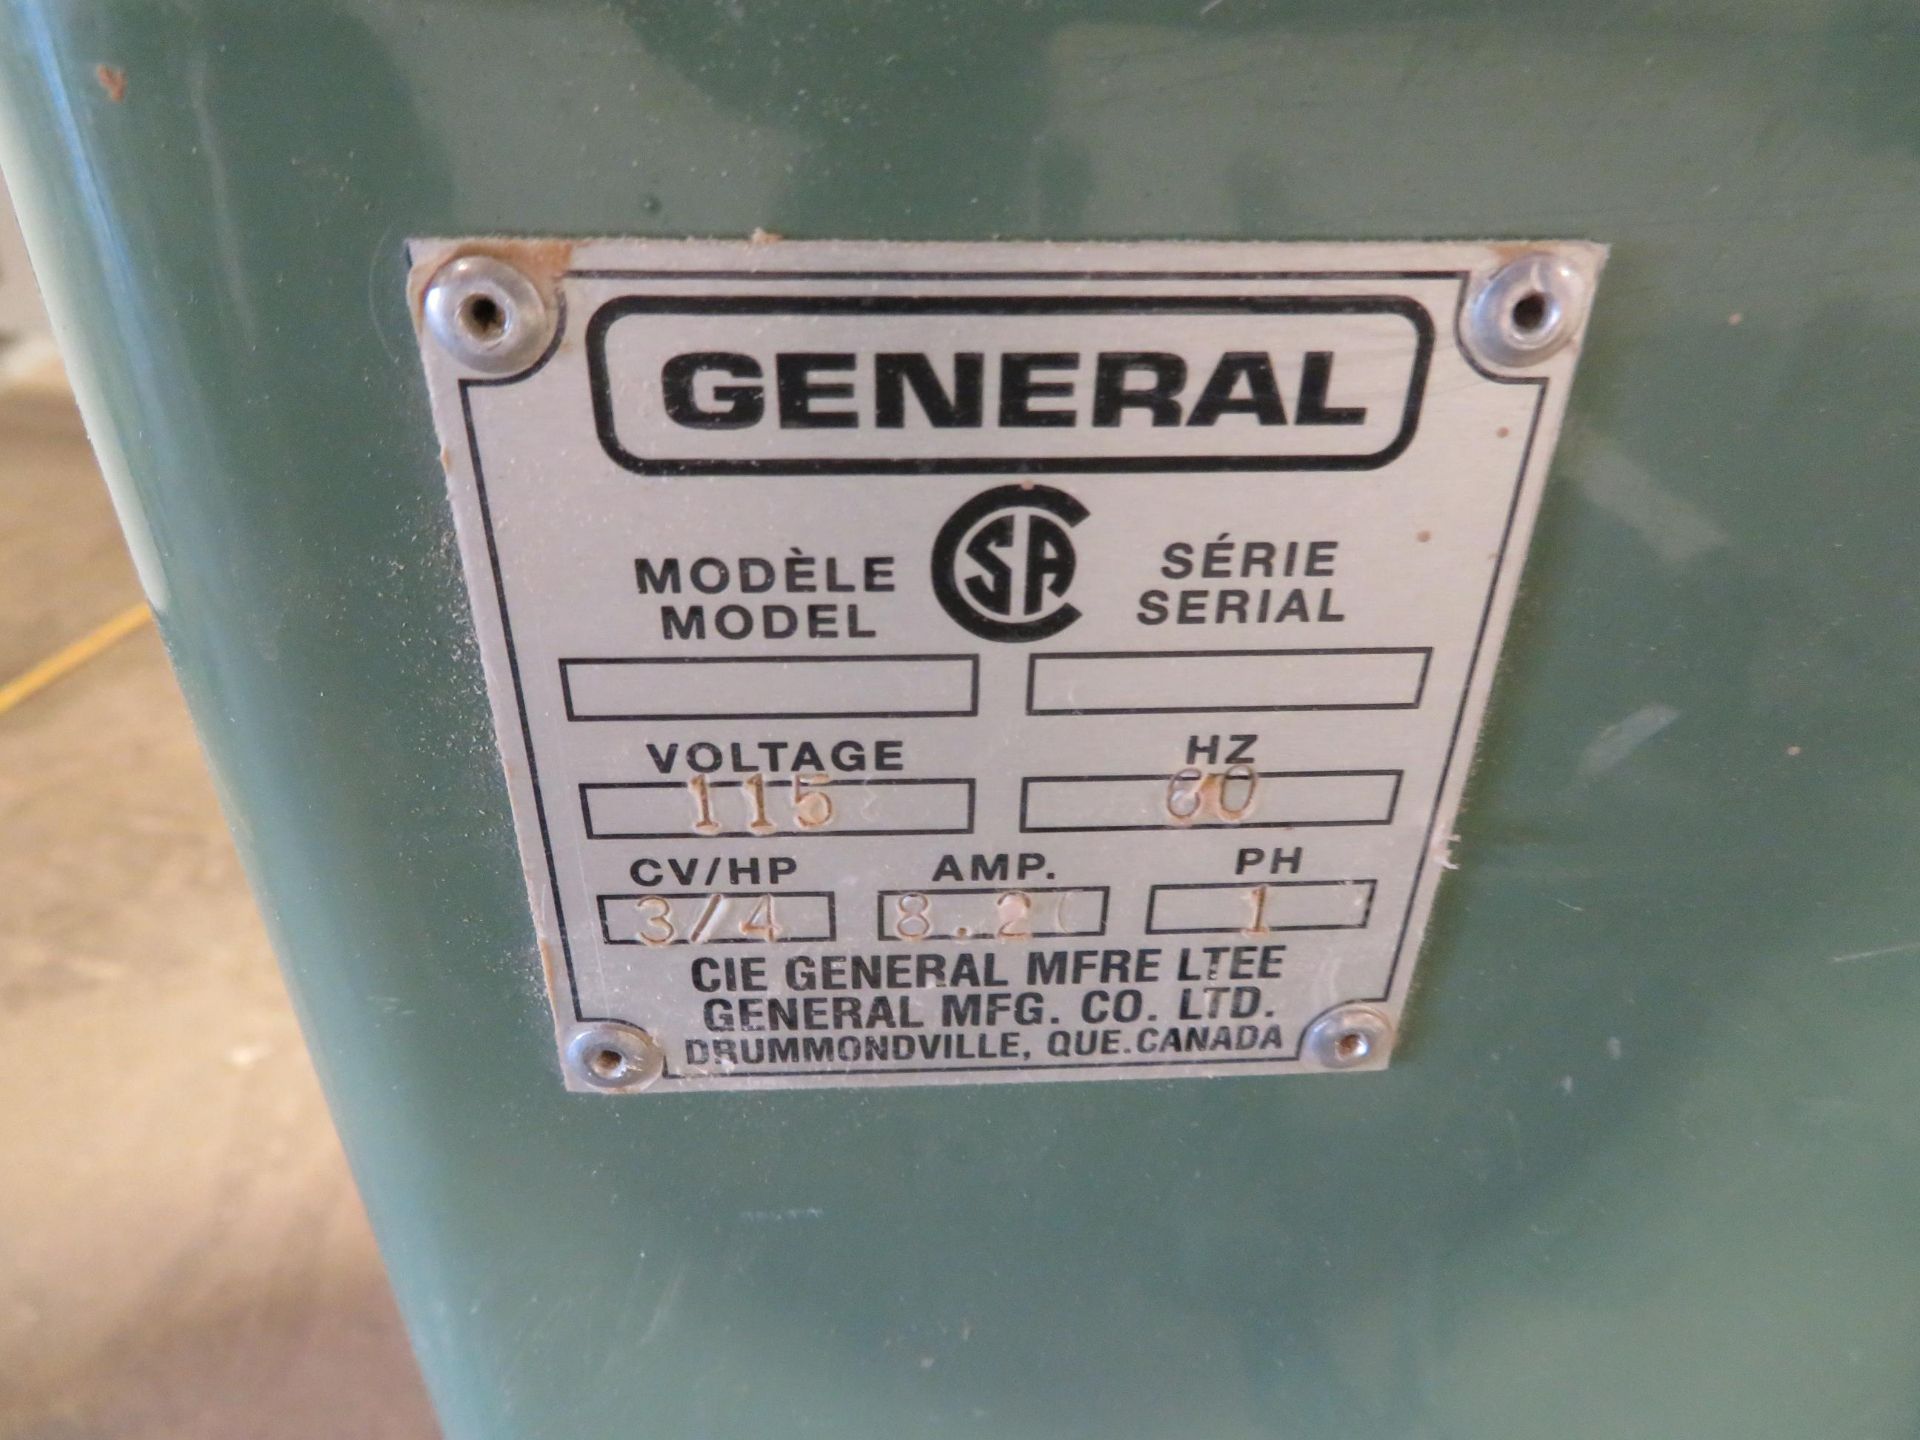 GENERAL band saw, Mod# 490. 3/4 HP, 115 Volt, 60 HZ, 1 PH - Image 2 of 4